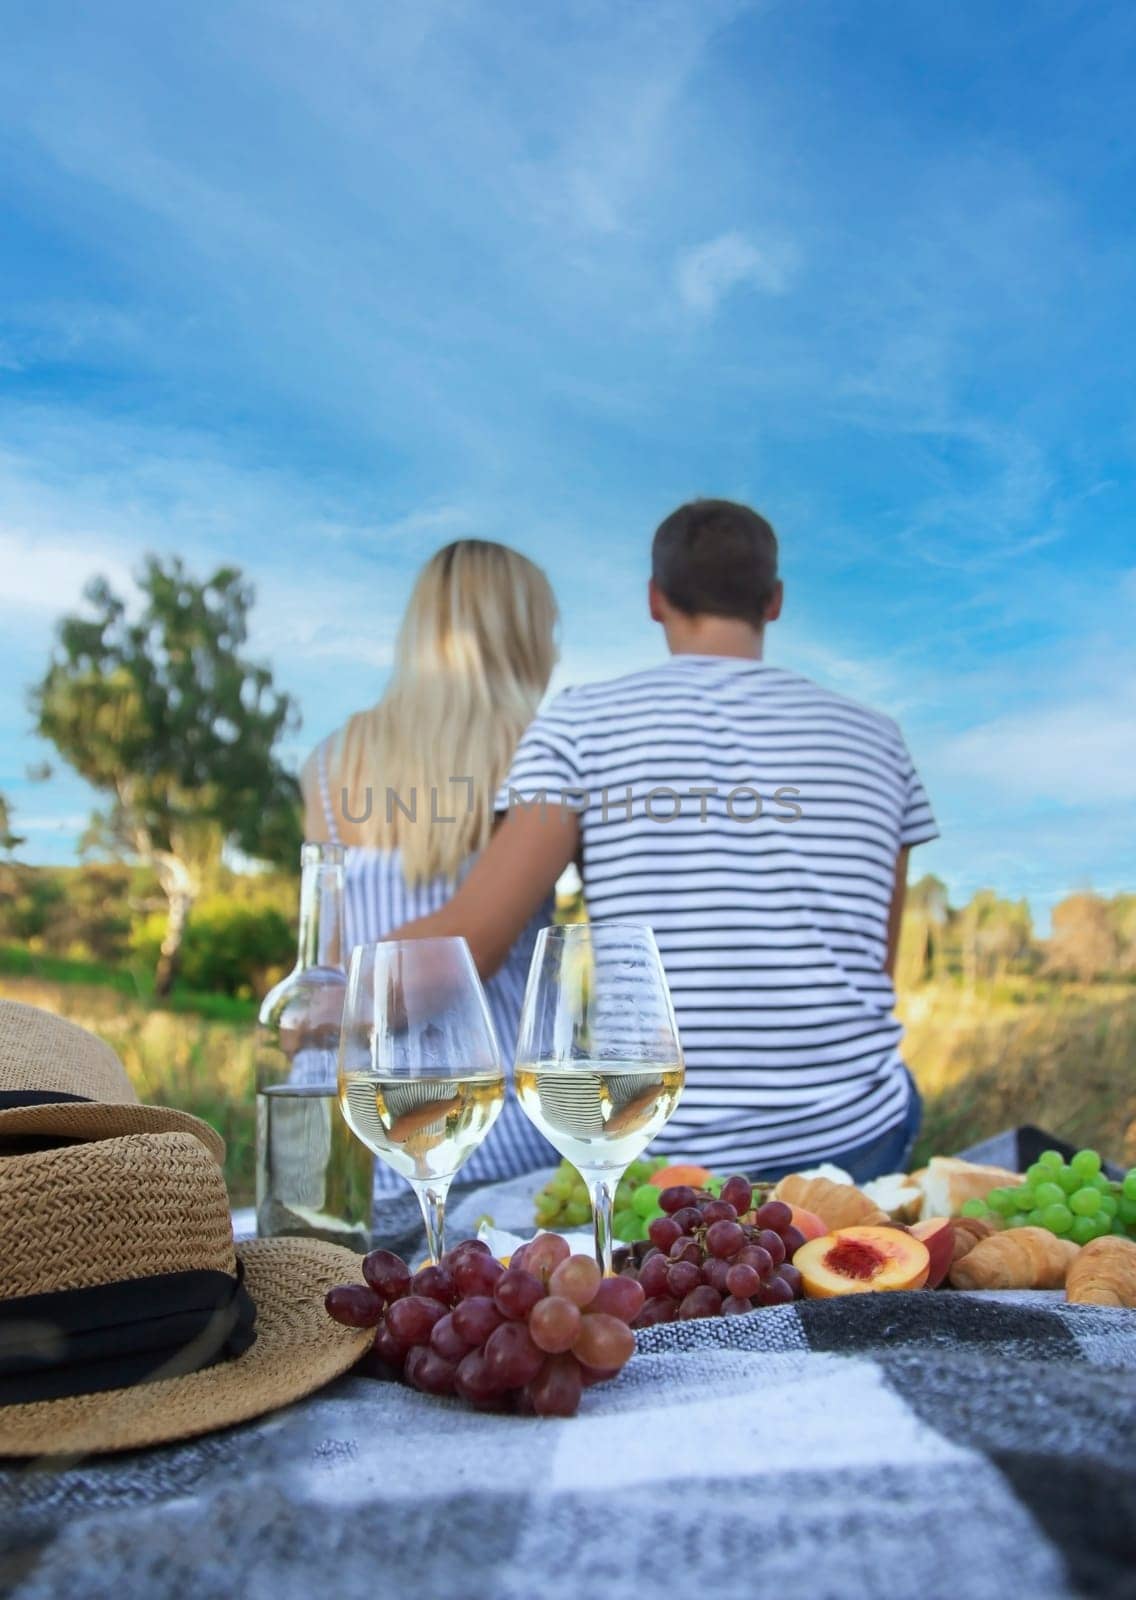 couple in love drinking wine on a picnic. Selective focus by Anuta23